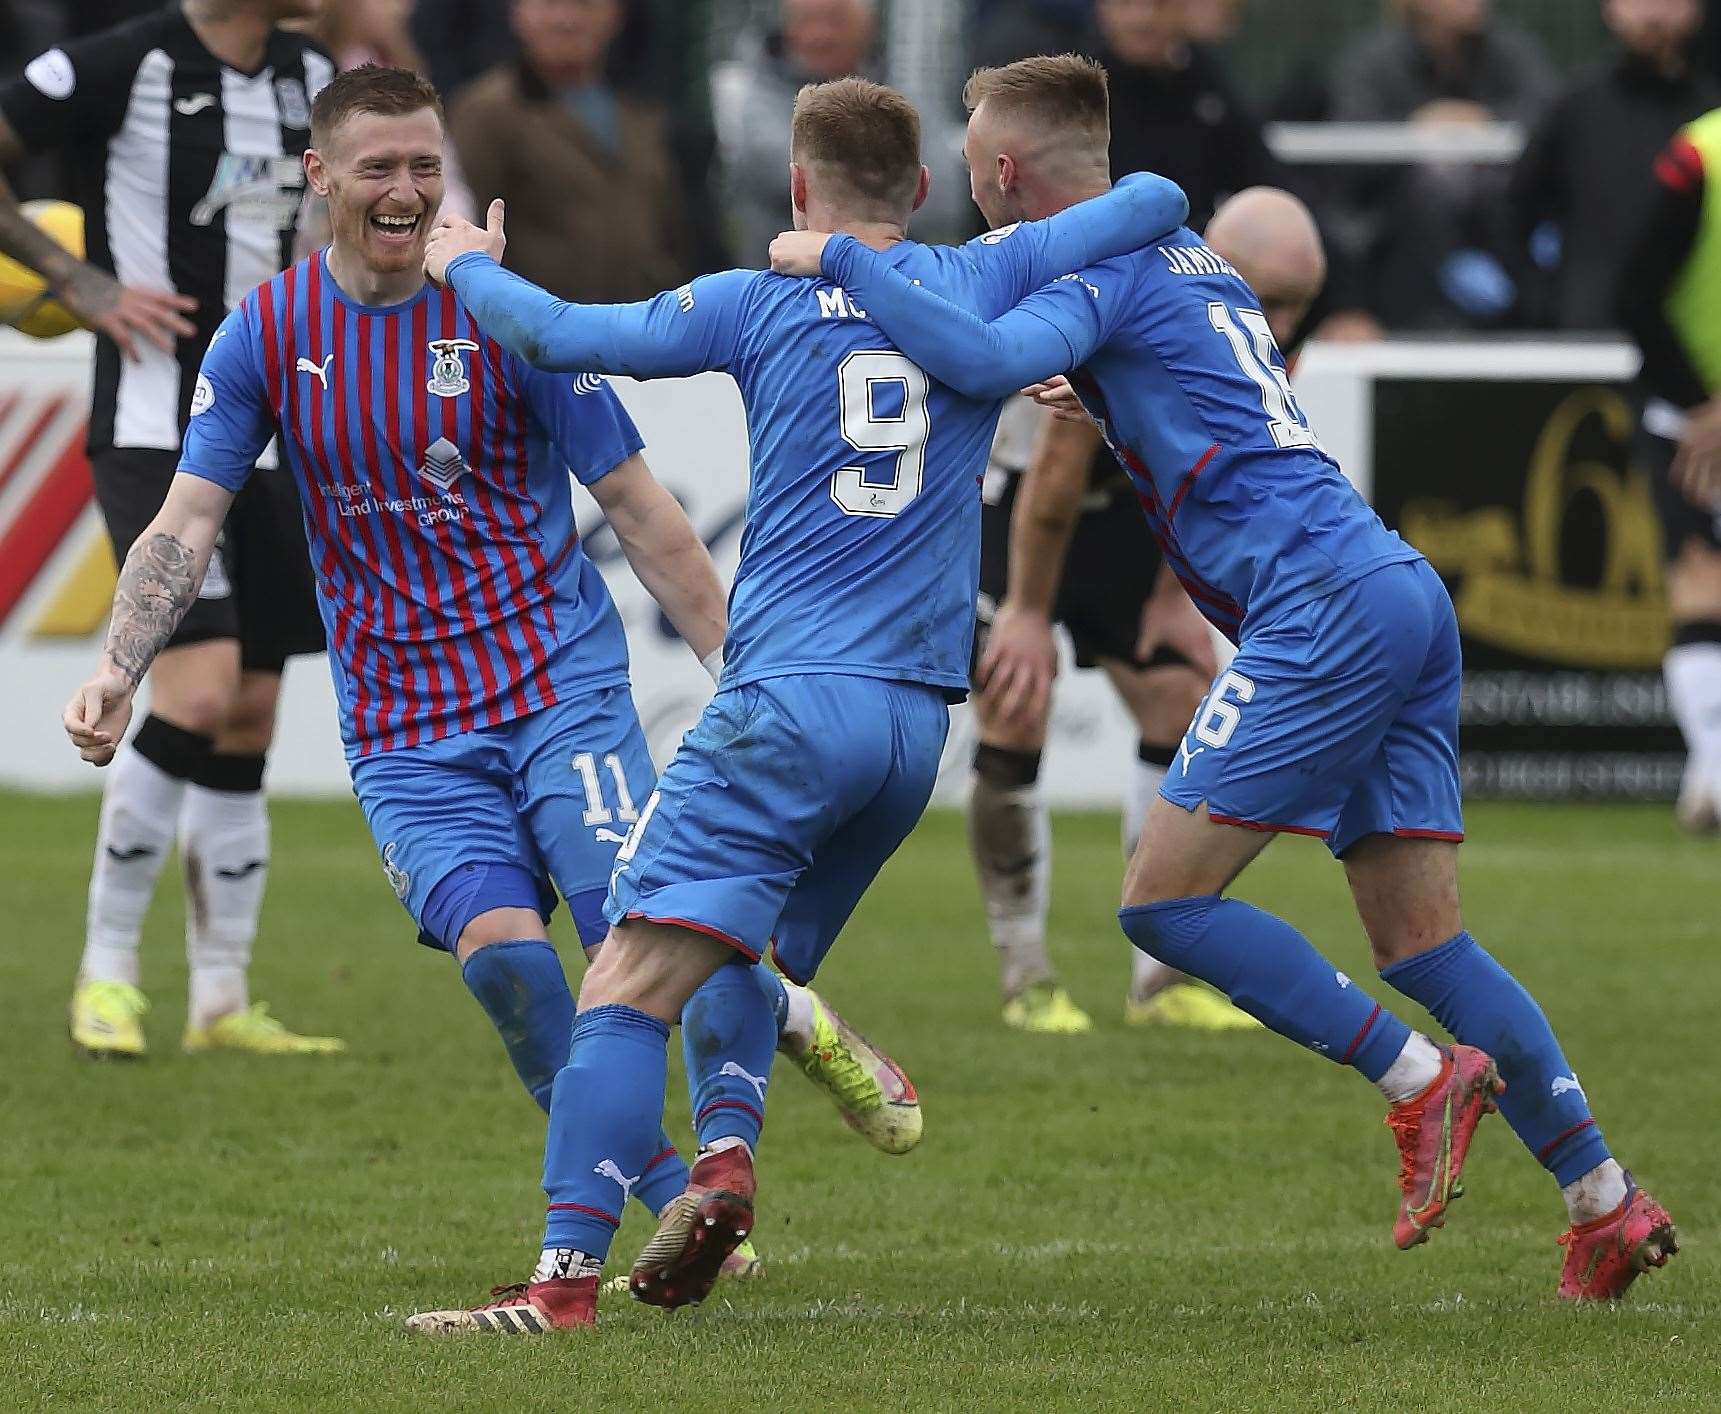 Caley Thistle stay top of the Championship after win over Greenock Morton